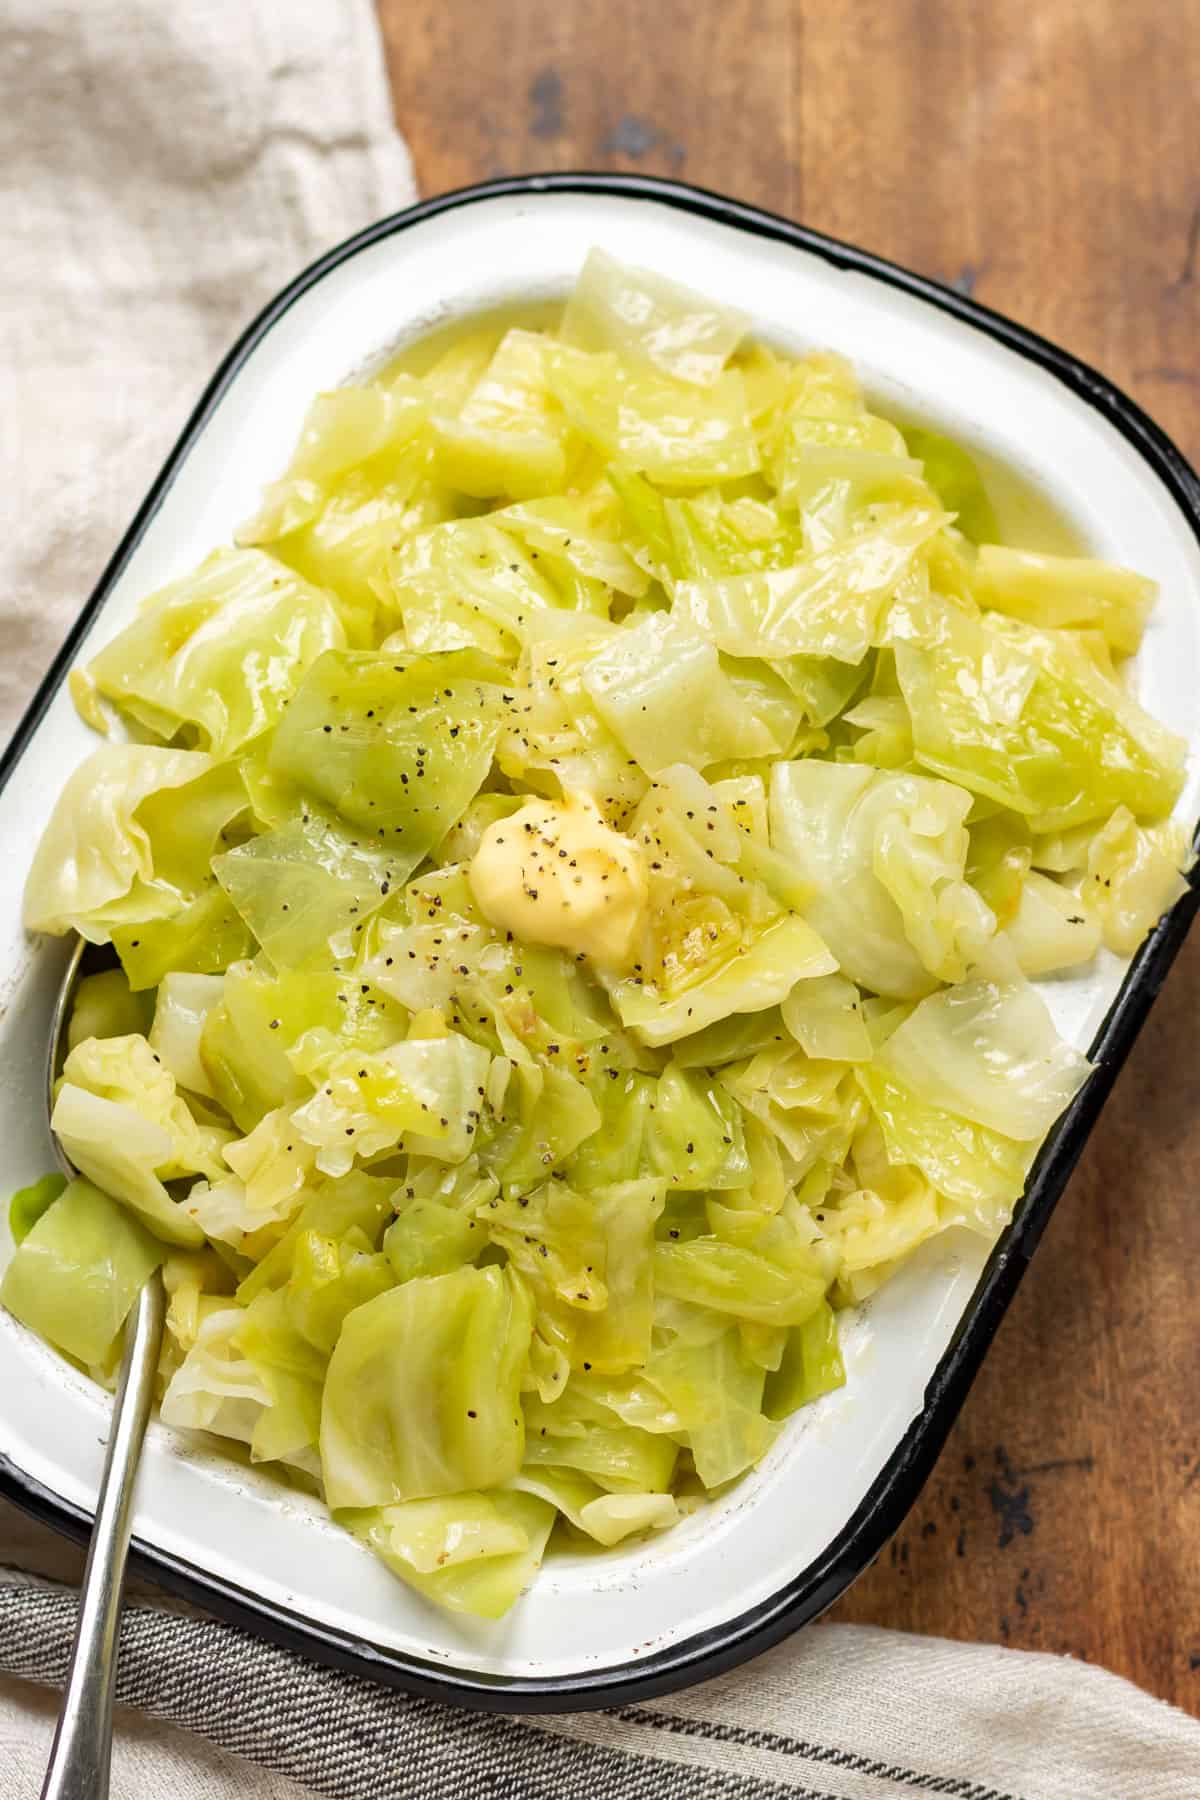 Dish of buttered cabbage on a wooden table.